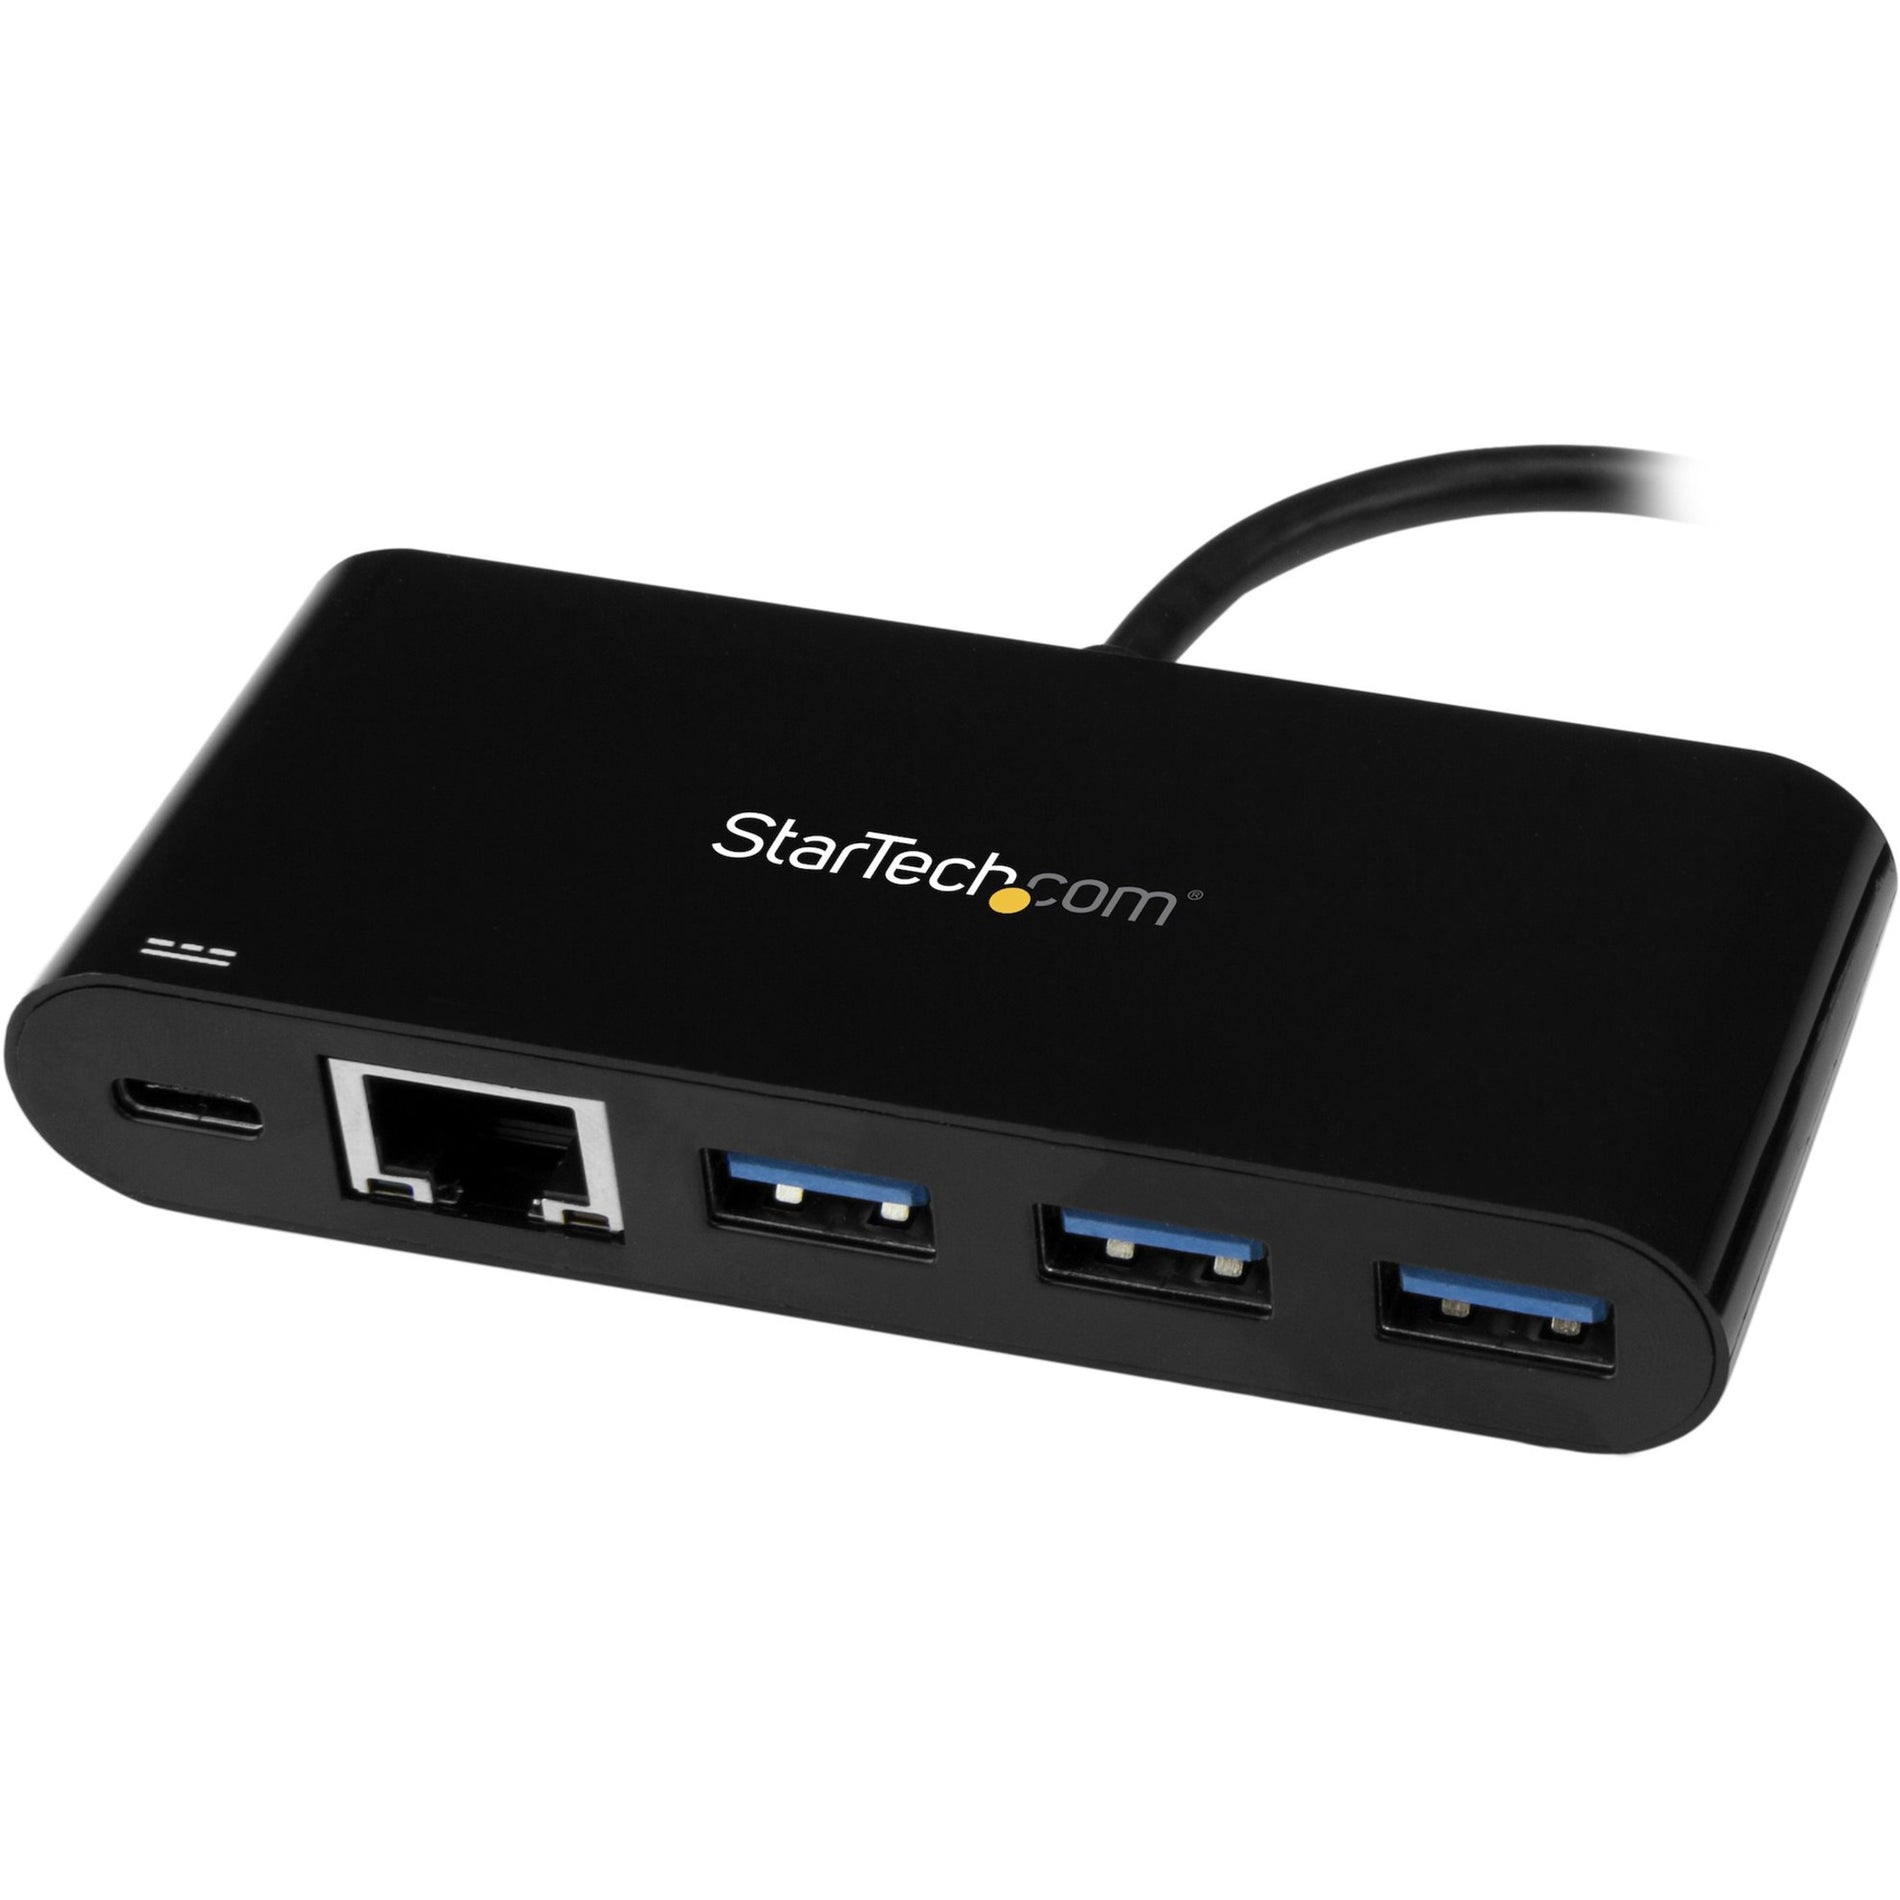 StarTech.com HB30C3AGEPD 3-Port USB 3.0 Hub with Gigabit Ethernet and Power Delivery - USB Type C Hub with GbE and PD 2.0